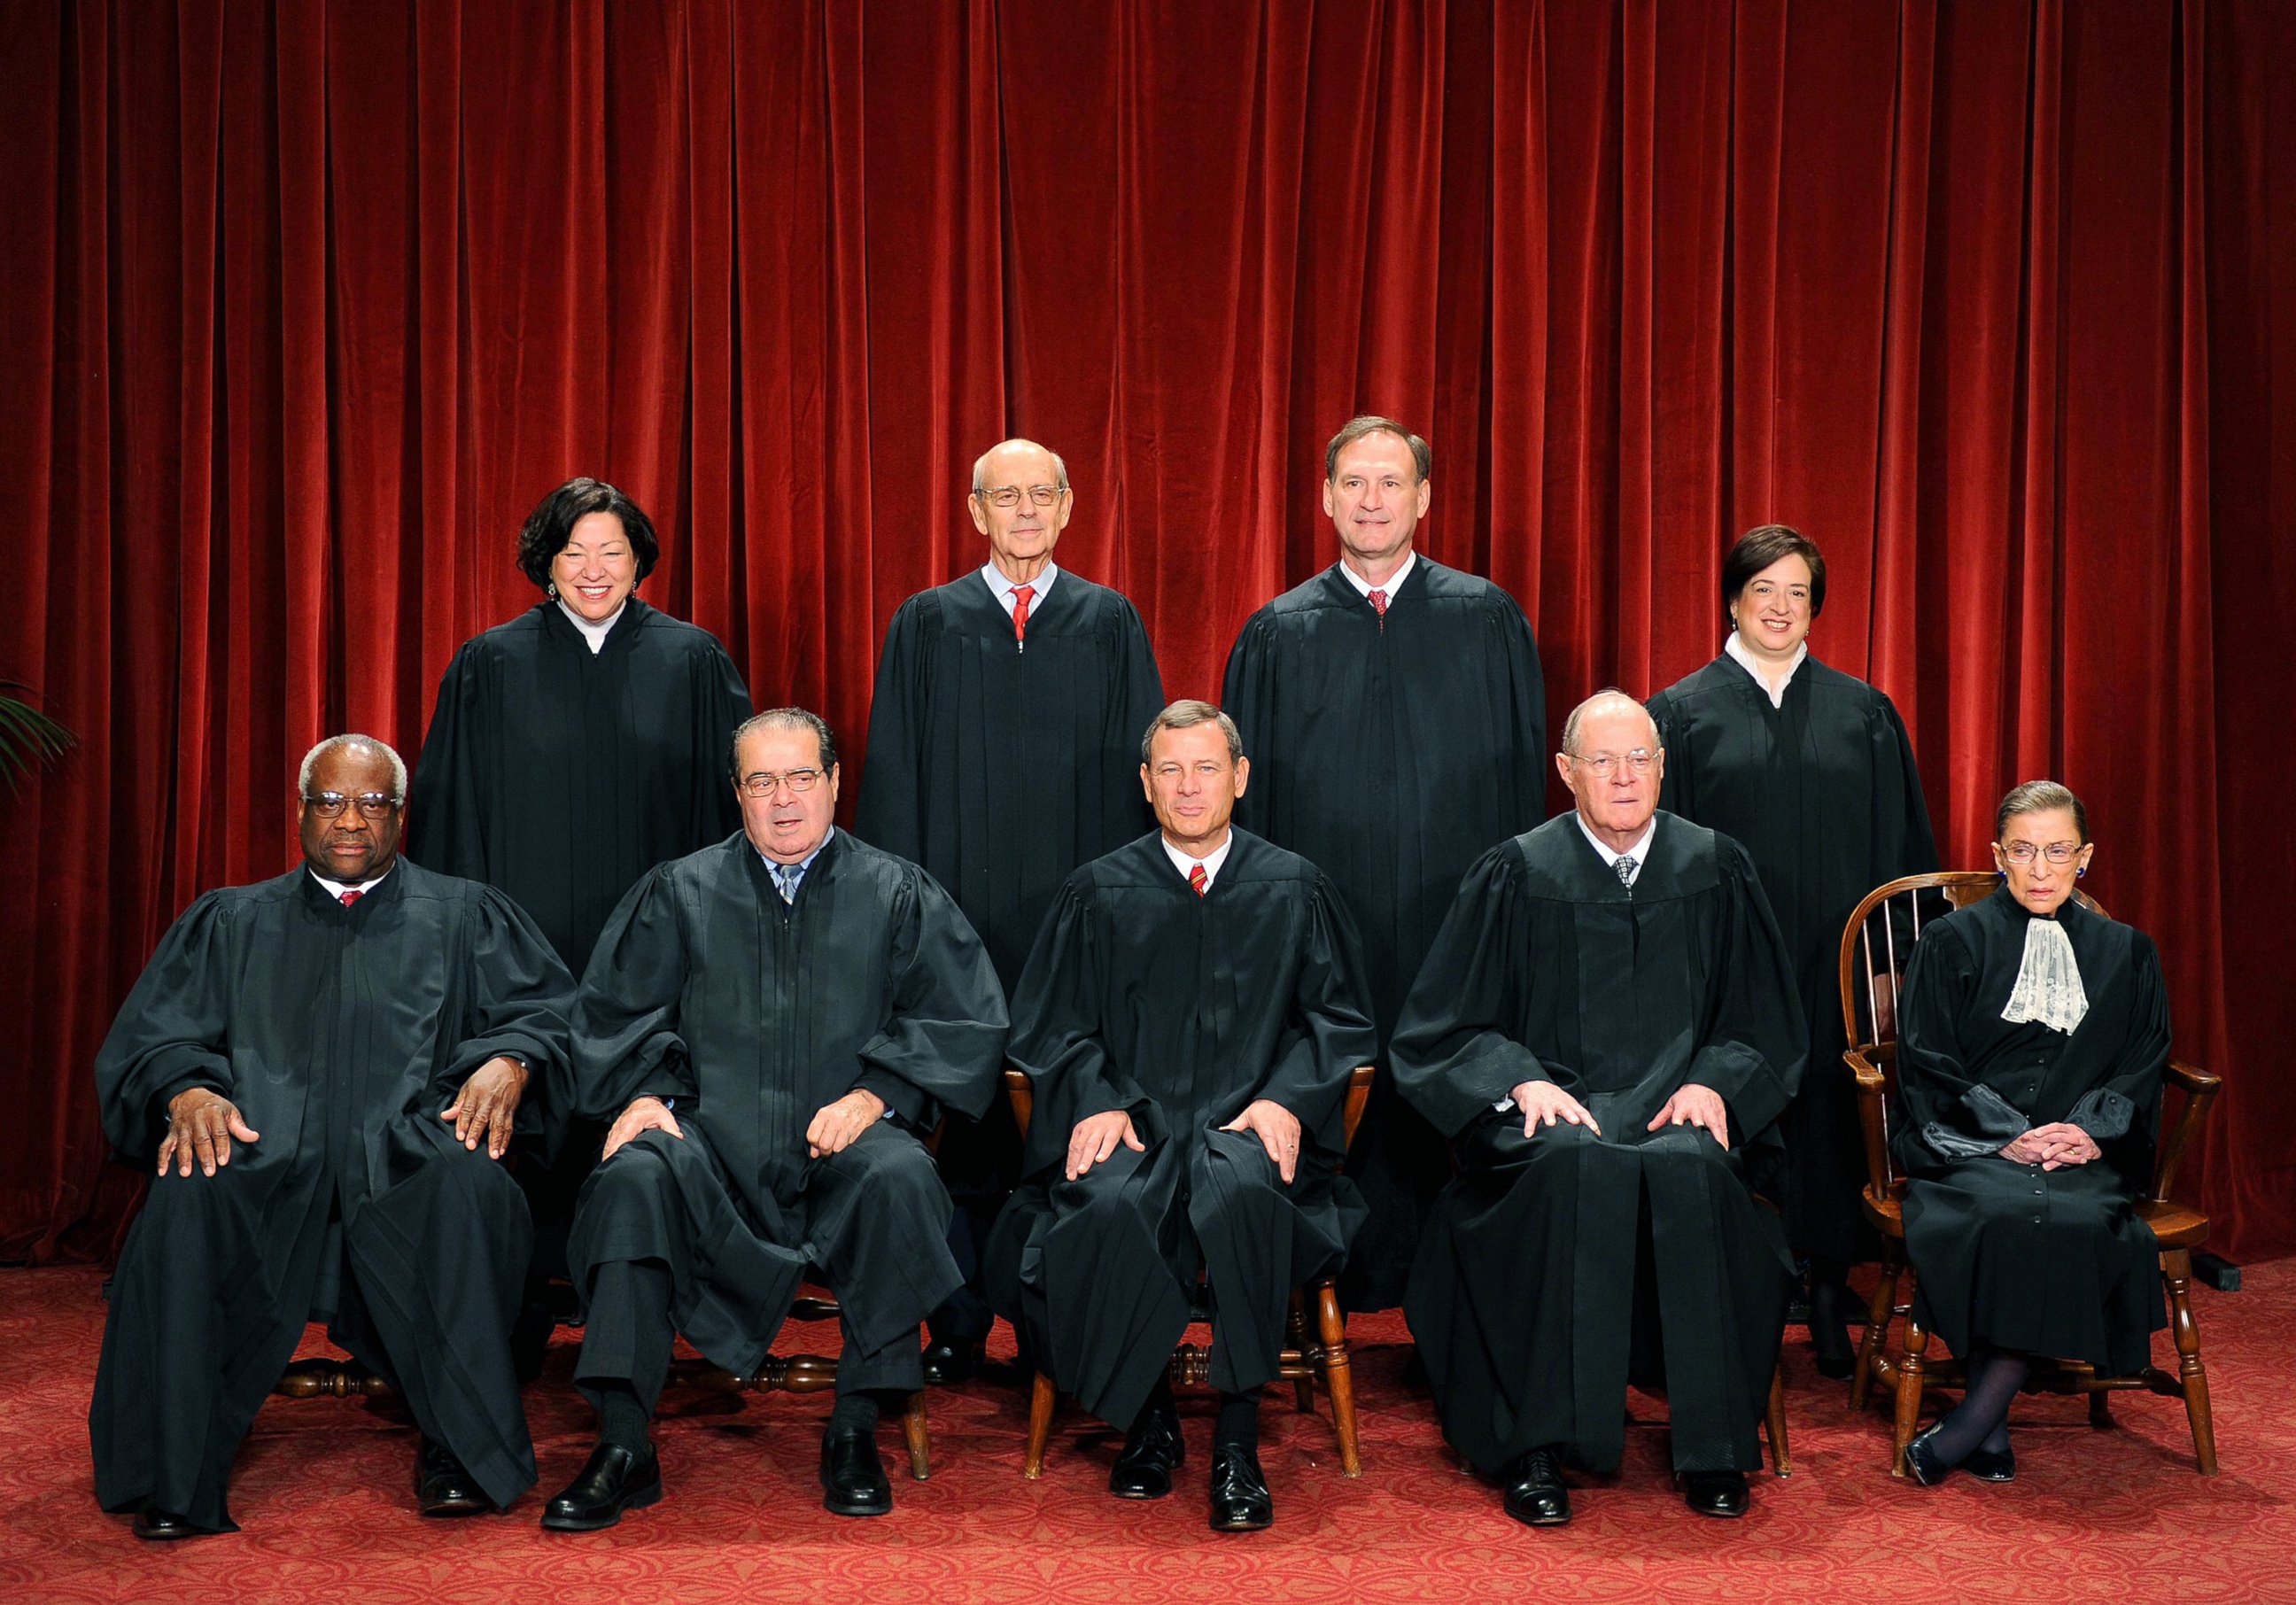 PHOTO: The Justices of the U.S. Supreme Court sit for their official photograph on Oct. 8, 2010 at the Supreme Court in Washington.